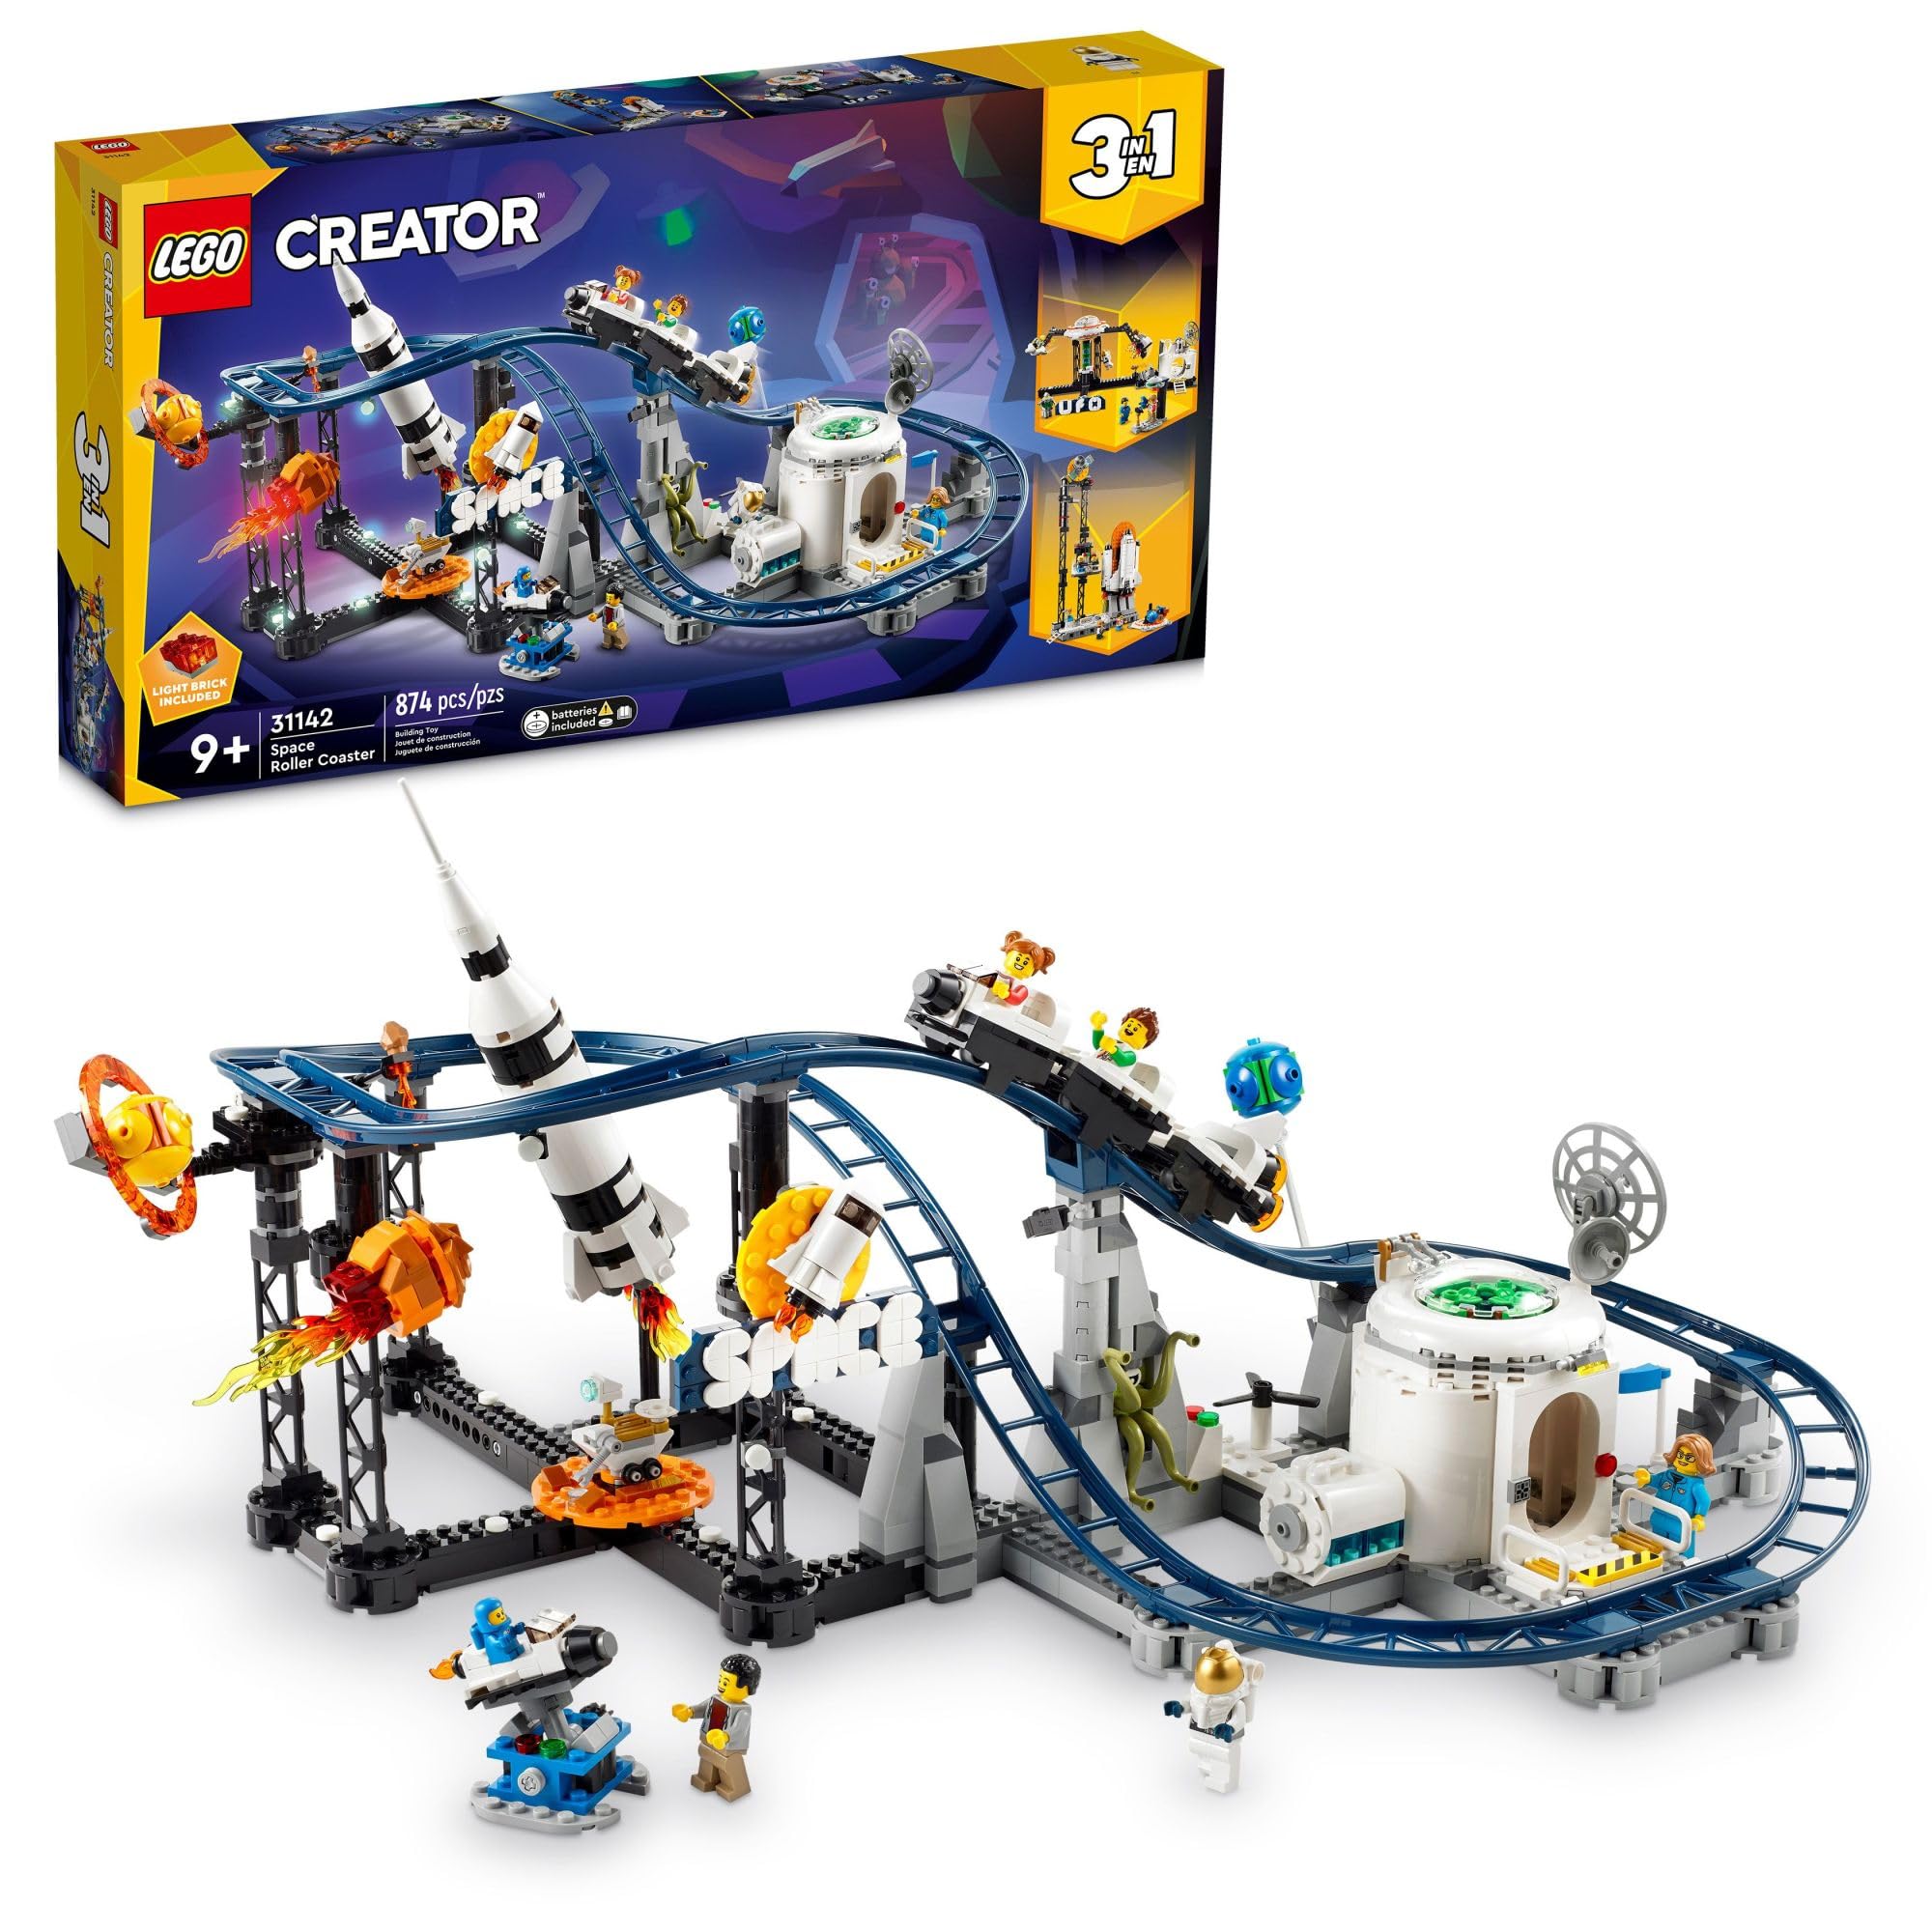 LEGO Creator Space Roller Coaster 31142 3 in 1 Building Toy Set Featuring a Roller Coaster, Drop Tower, Carousel and 5 Minifigures, Rebuildable Amusement Park for Kids Ages 9+